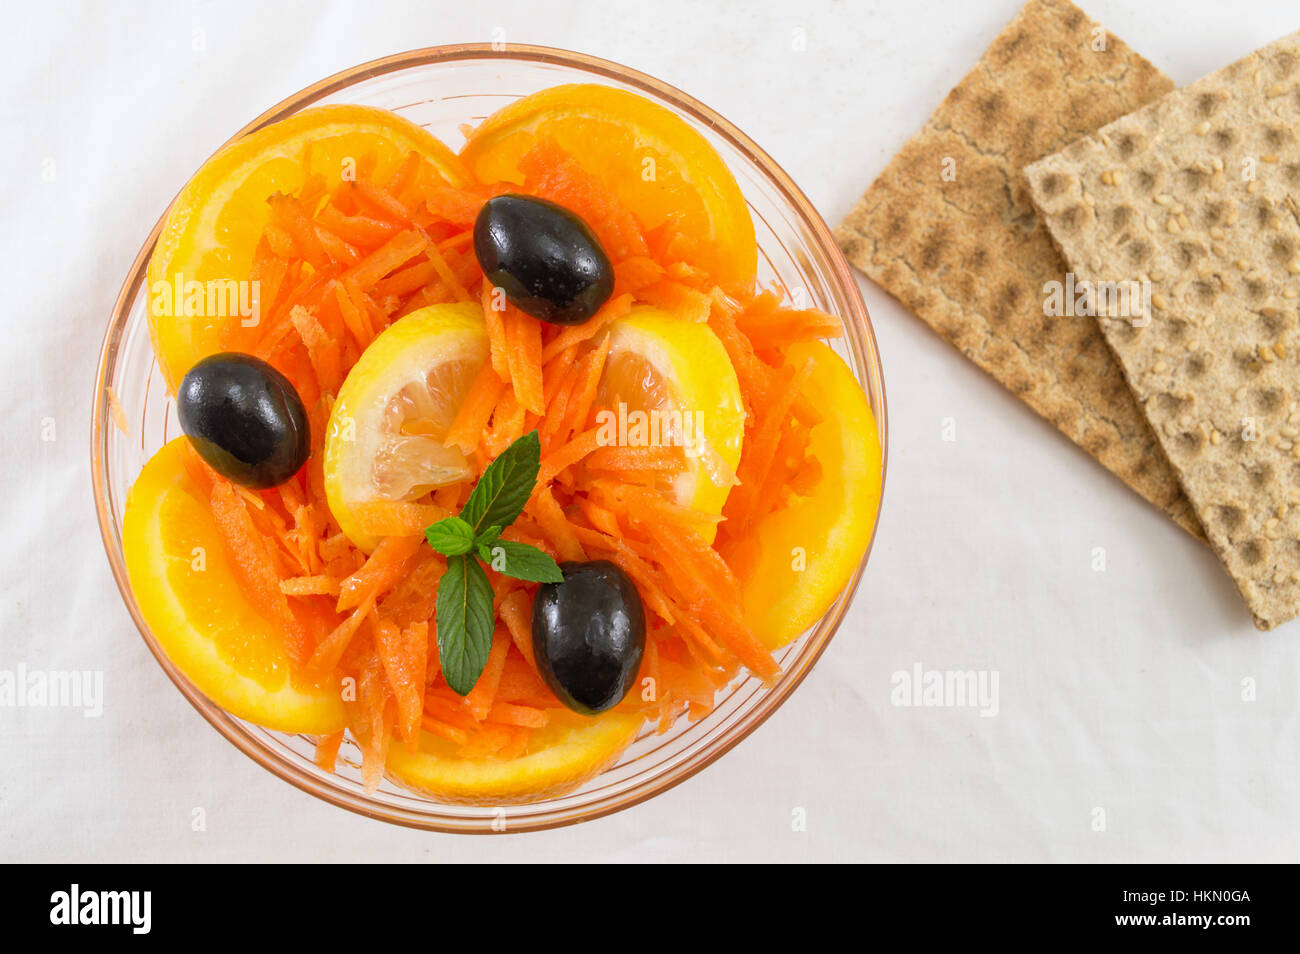 orange, carrot and olive salad with integral biscuits Stock Photo